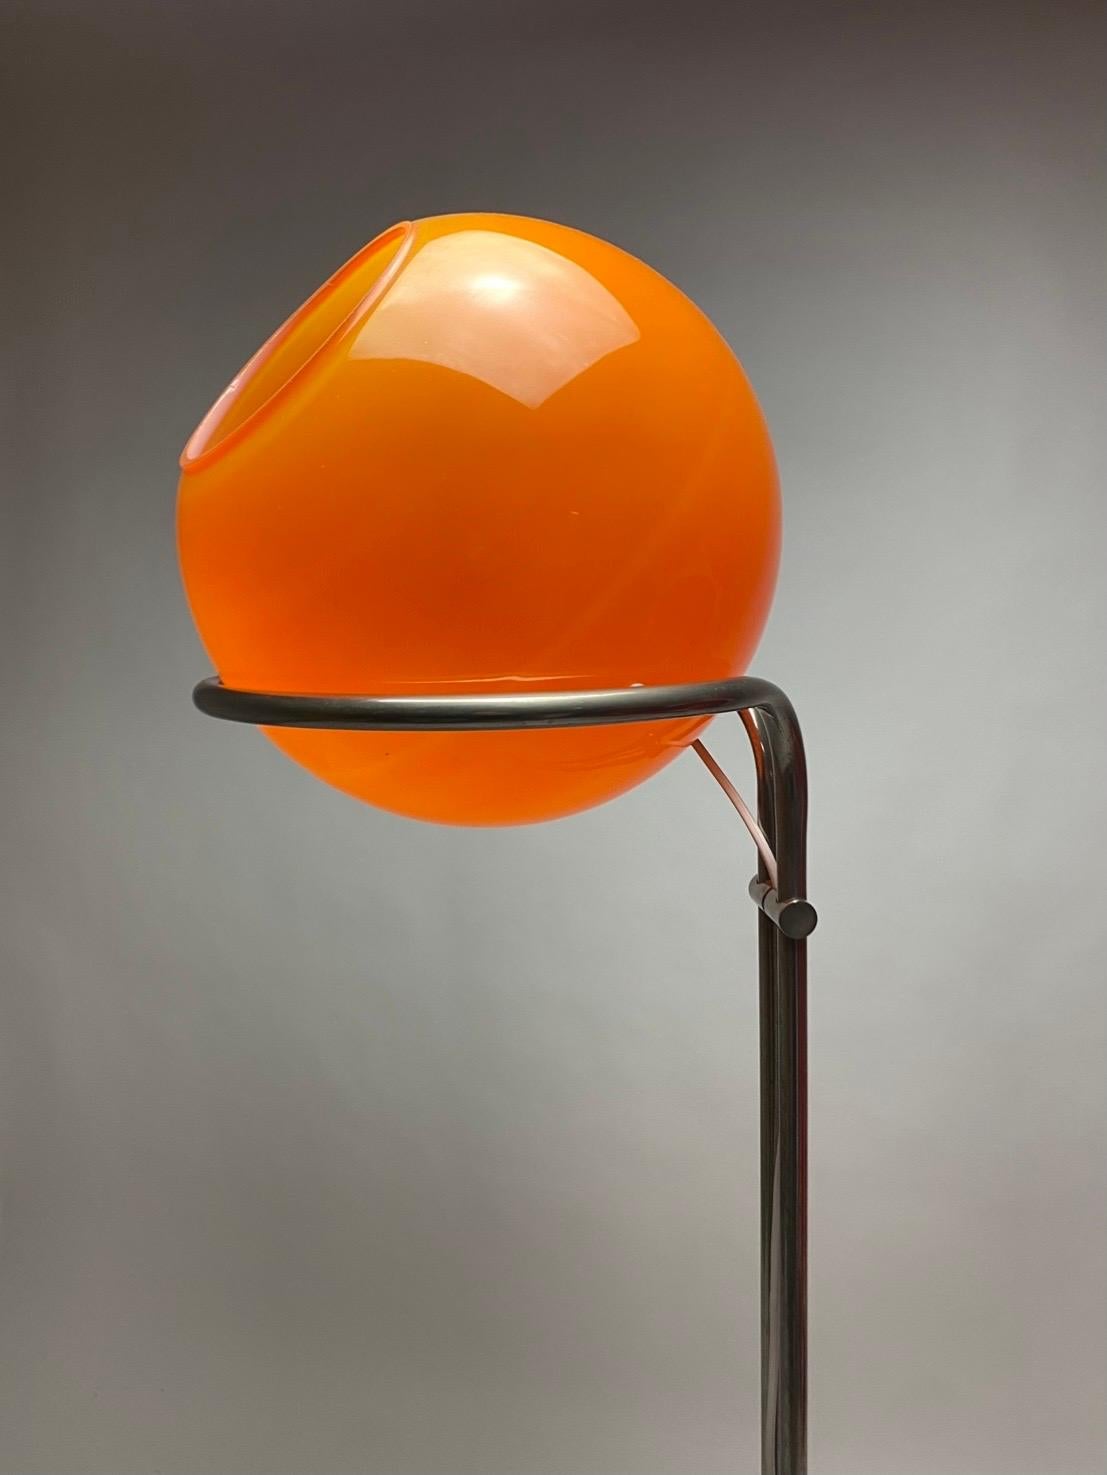 Stunning, breathtaking and very rare floor lamp by Tibor Hazi 1973.

Talking about quality it doesn’t get much better. A real contemporary space age design. 

Hand blown thick orange glass with a base of nickle plated metal. 

Tibor Hazi a